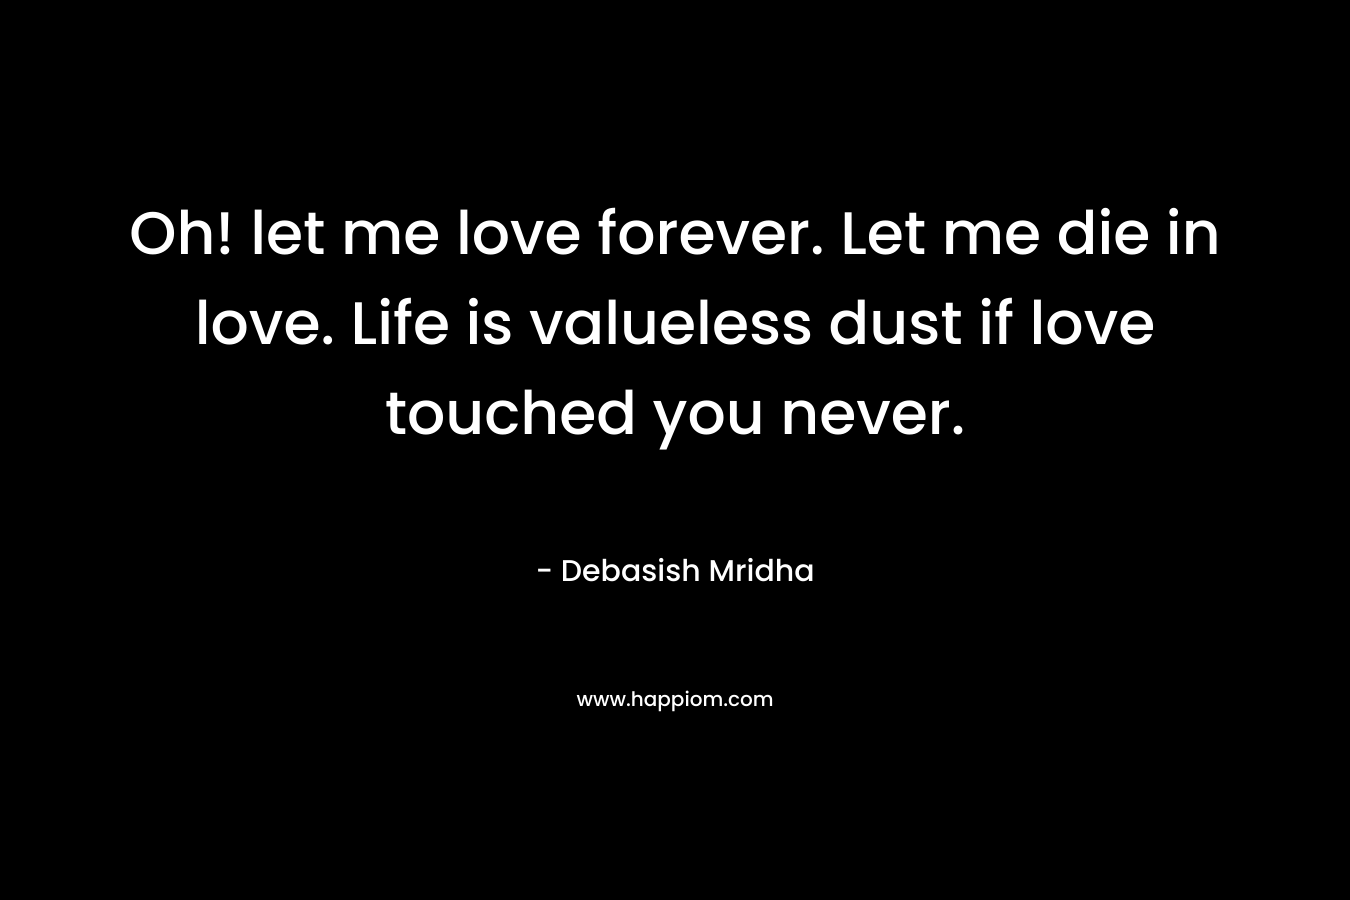 Oh! let me love forever. Let me die in love. Life is valueless dust if love touched you never.